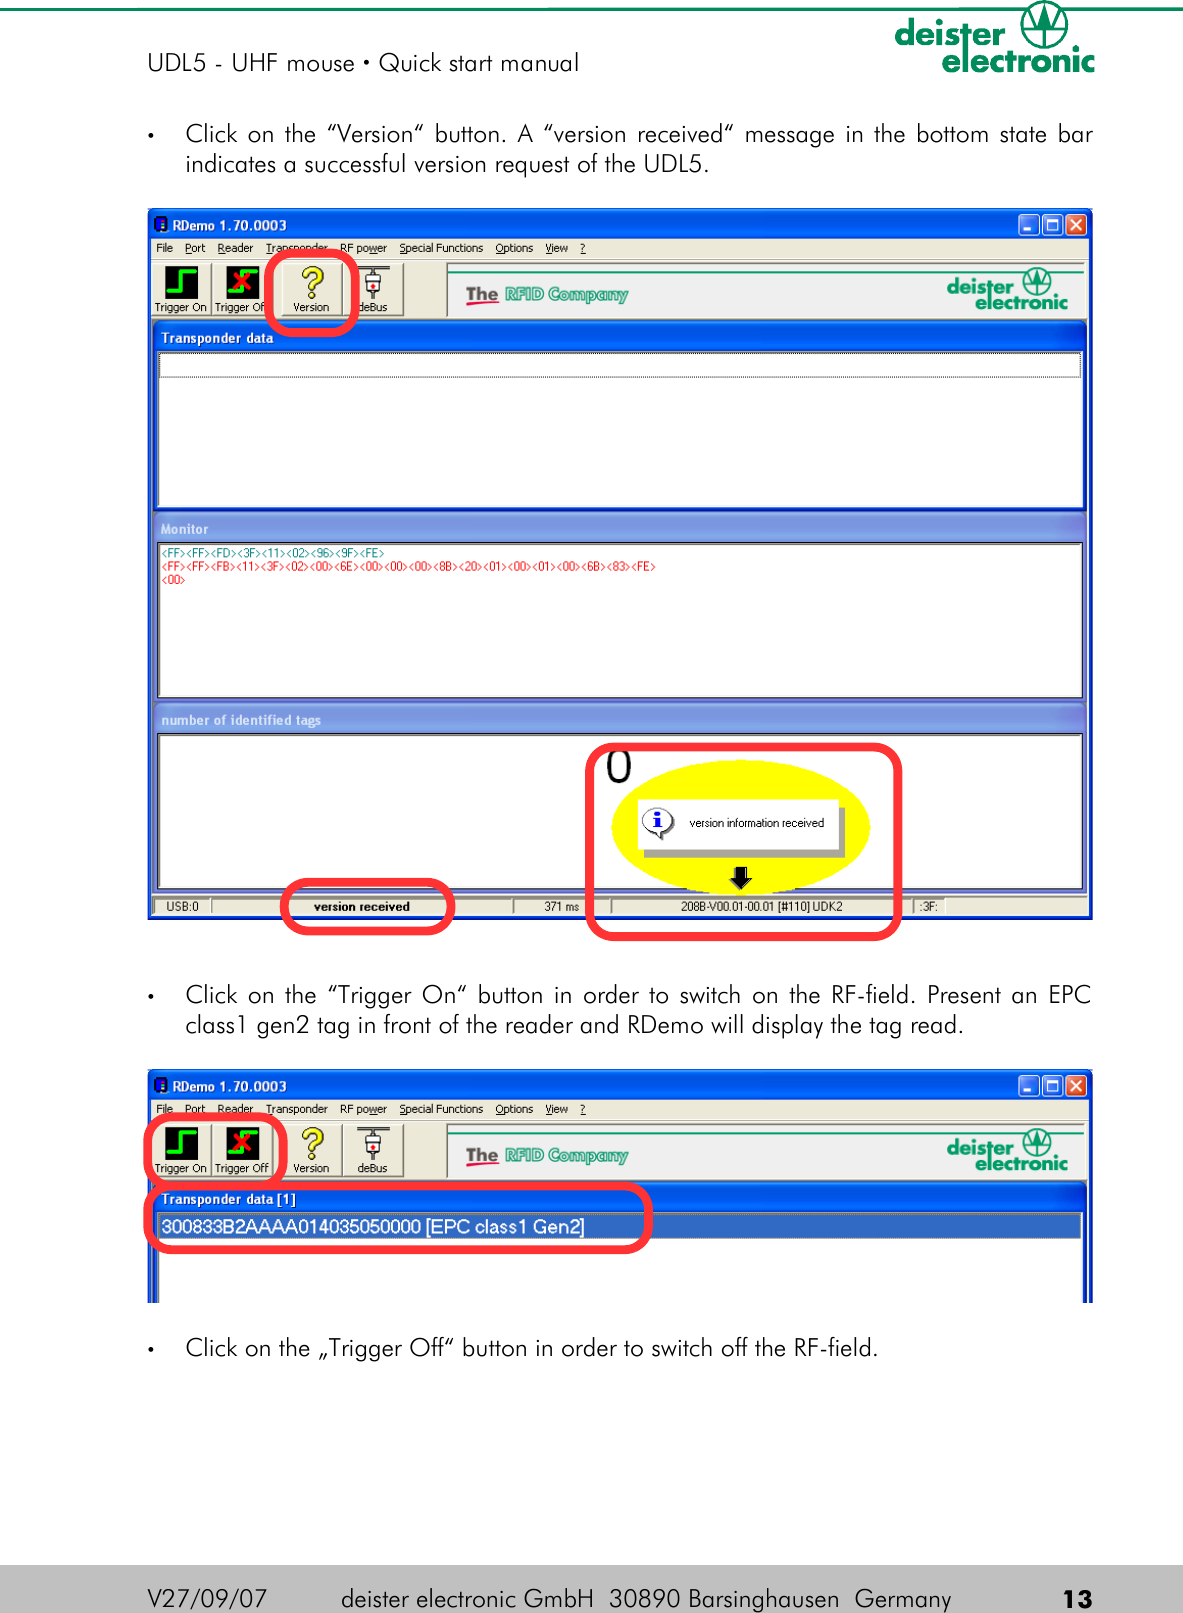 •Click on the “Version“ button.  A “version received“ message in the bottom state bar indicates a successful version request of the UDL5.•Click on the “Trigger On“ button in order to switch on the RF-field. Present an EPC class1 gen2 tag in front of the reader and RDemo will display the tag read. •Click on the „Trigger Off“ button in order to switch off the RF-field.V27/09/07 deister electronic GmbH  30890 Barsinghausen  Germany  13UDL5 - UHF mouse · Quick start manual